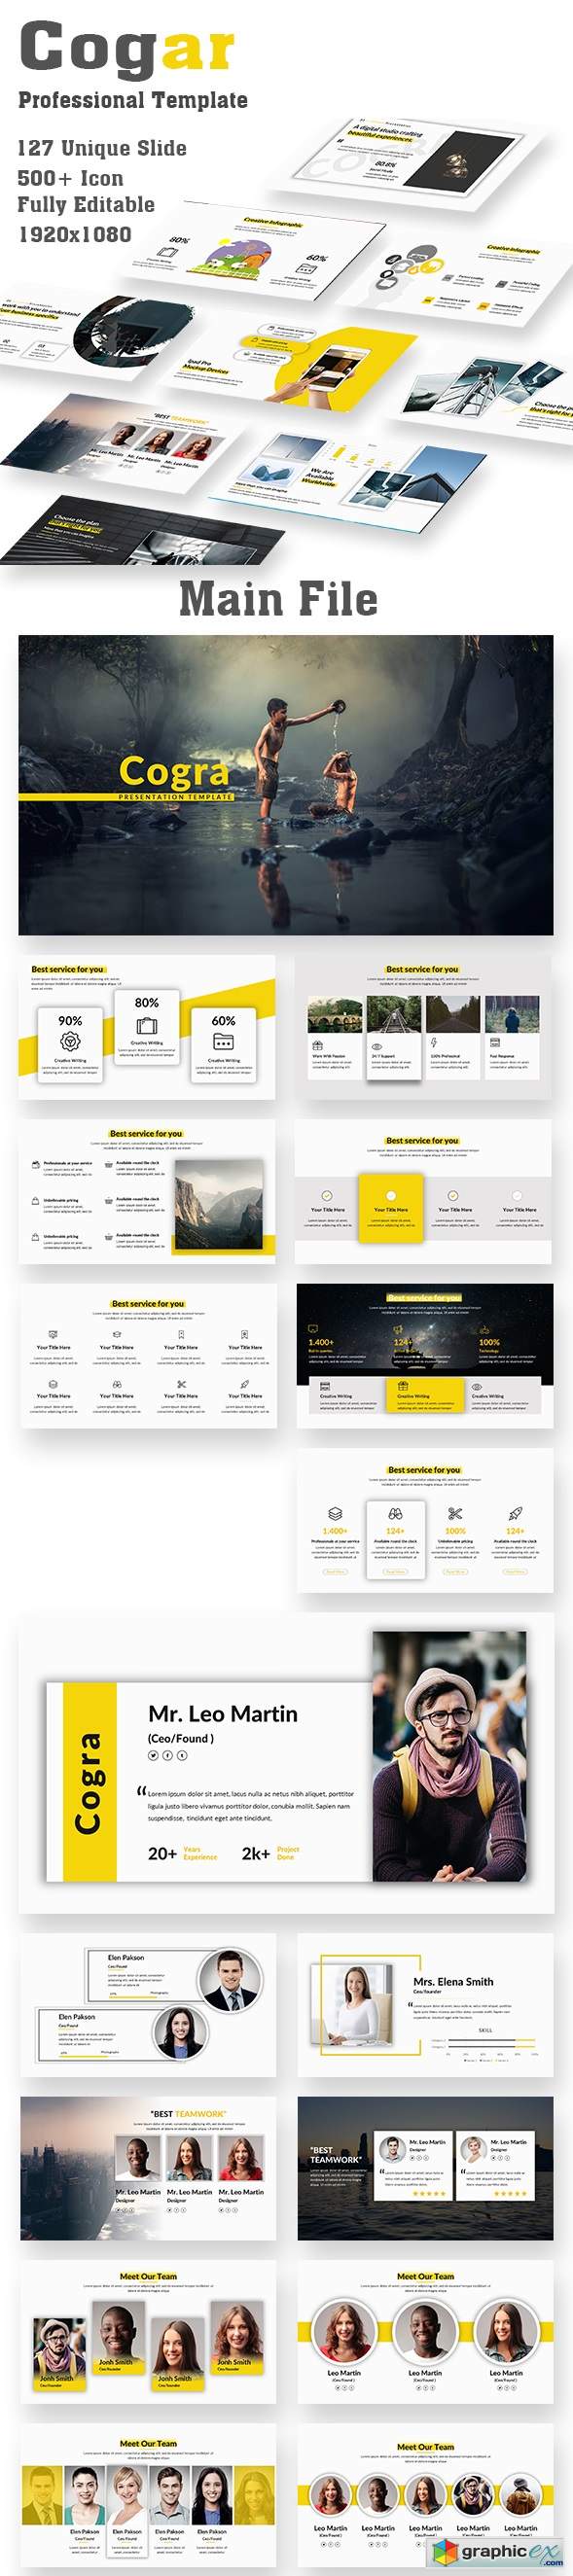 Cogra Professional PowerPoint Template